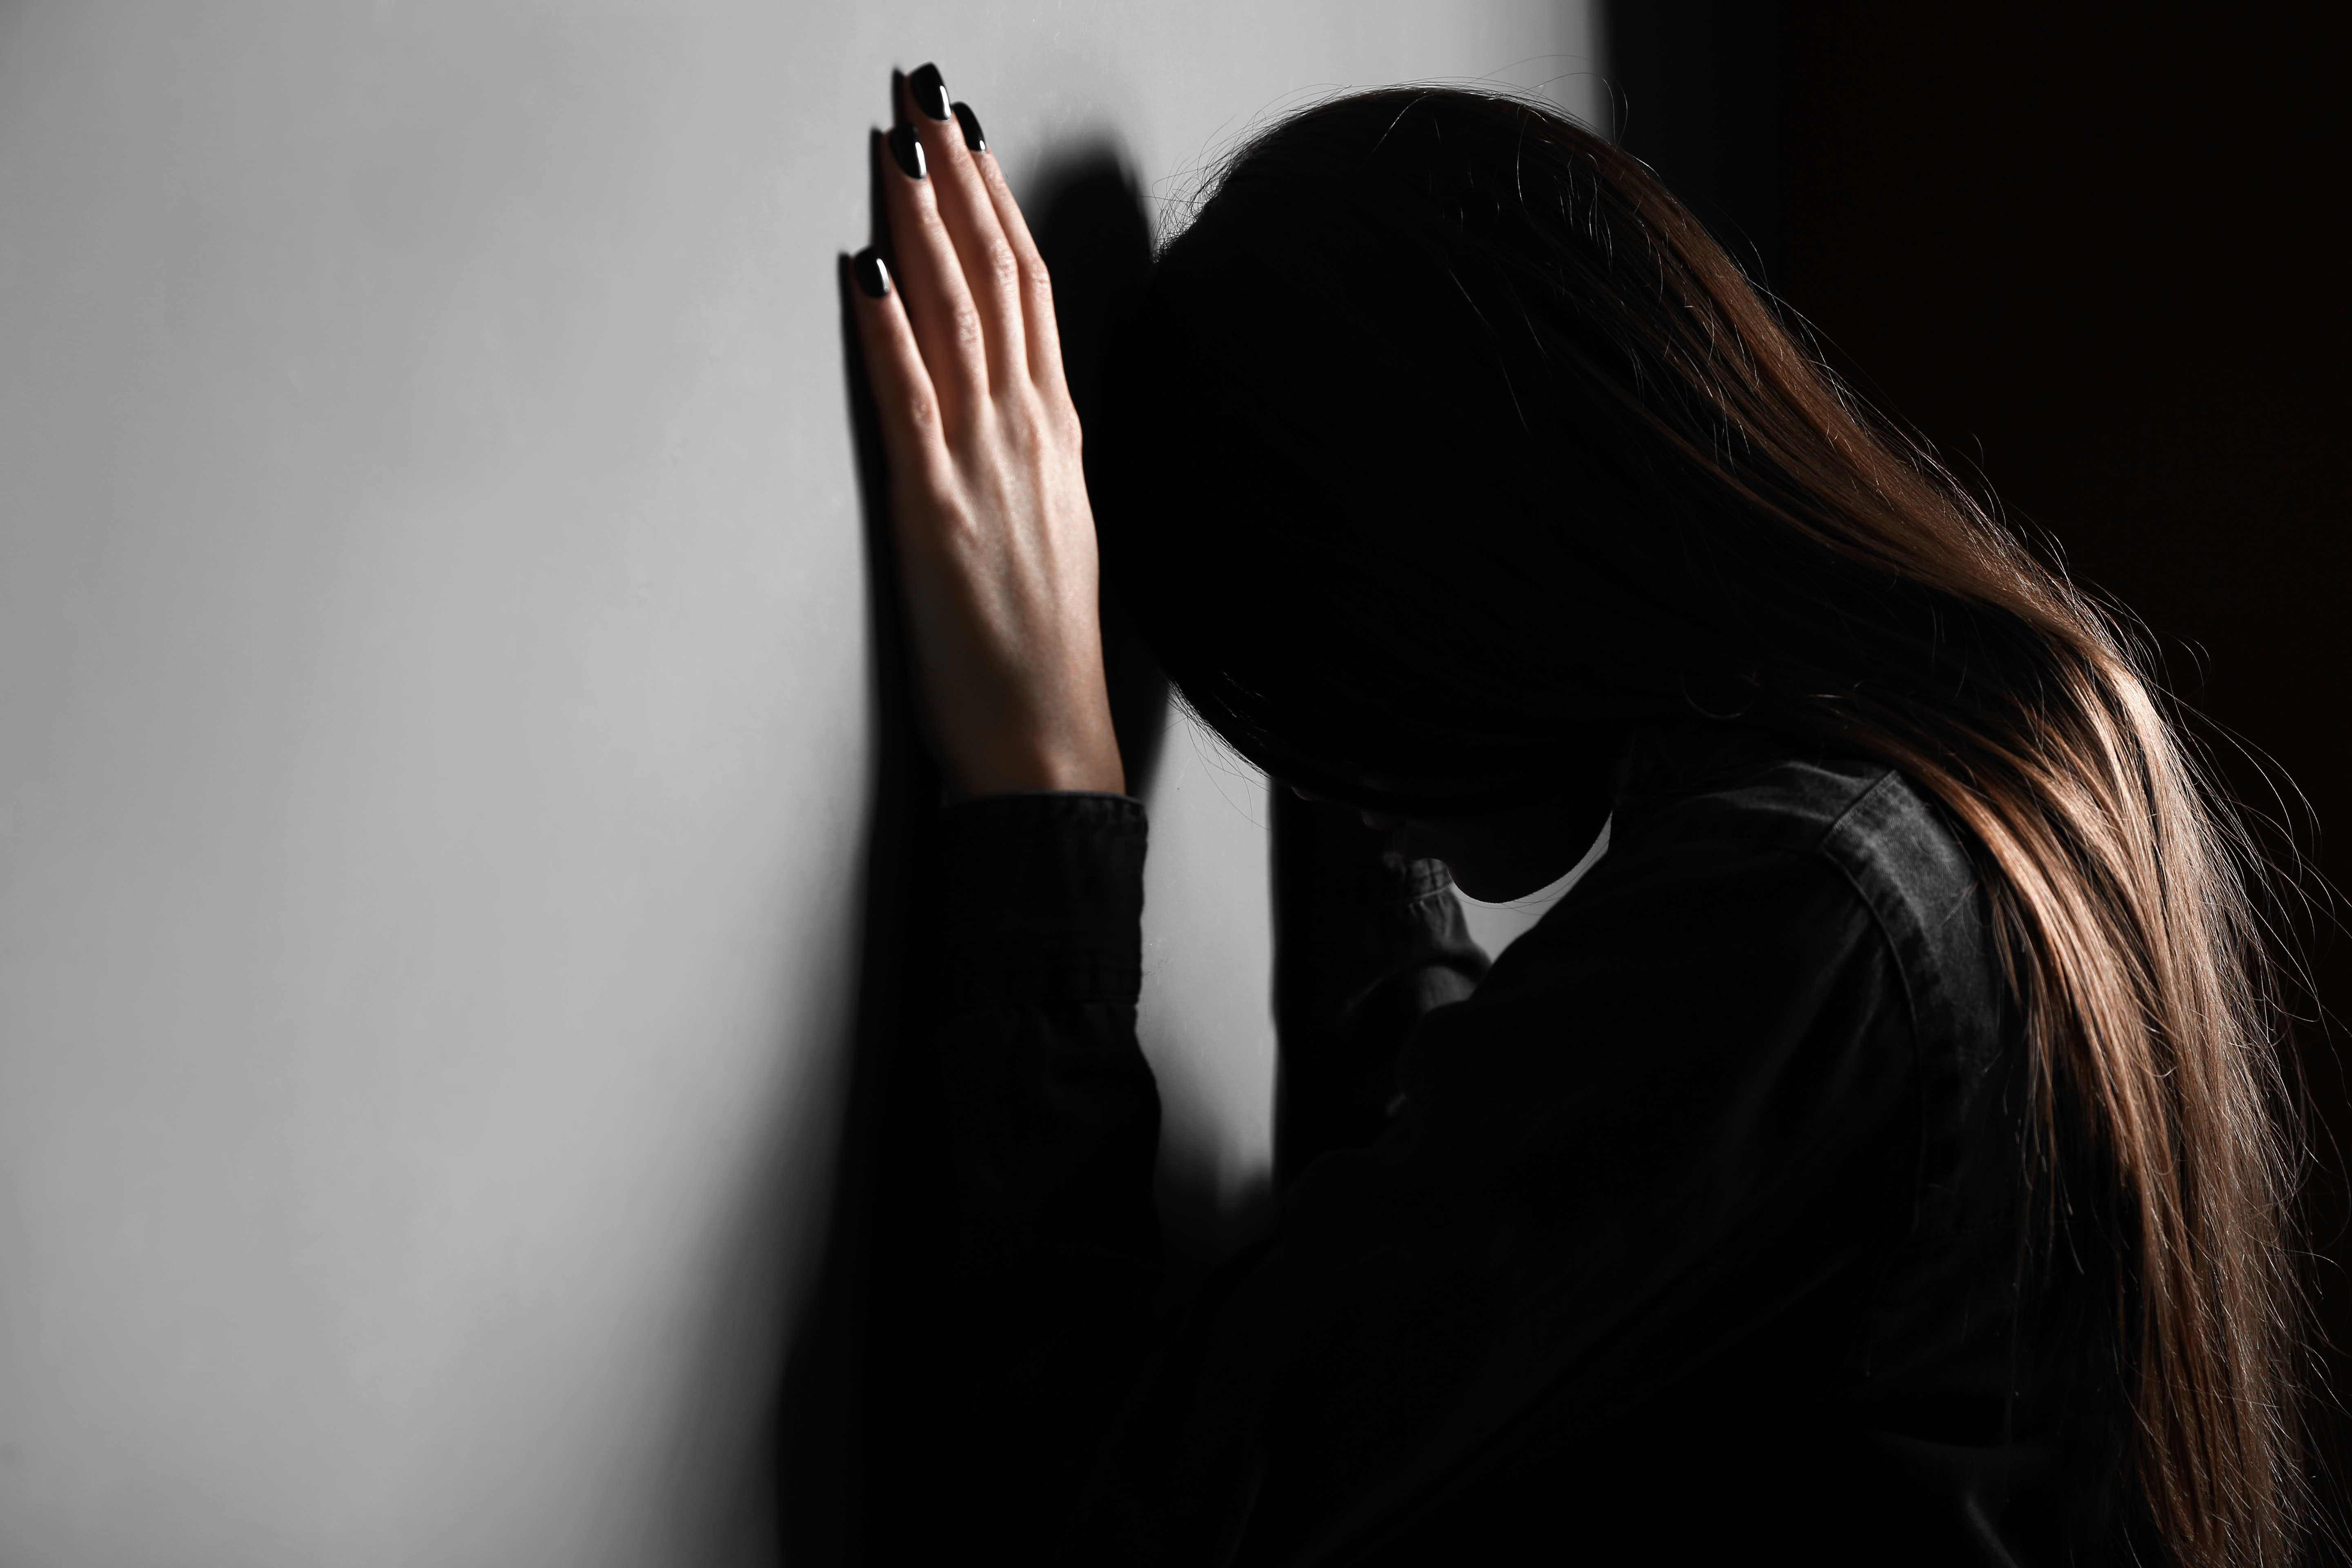 Depressed young woman | Source: Shutterstock